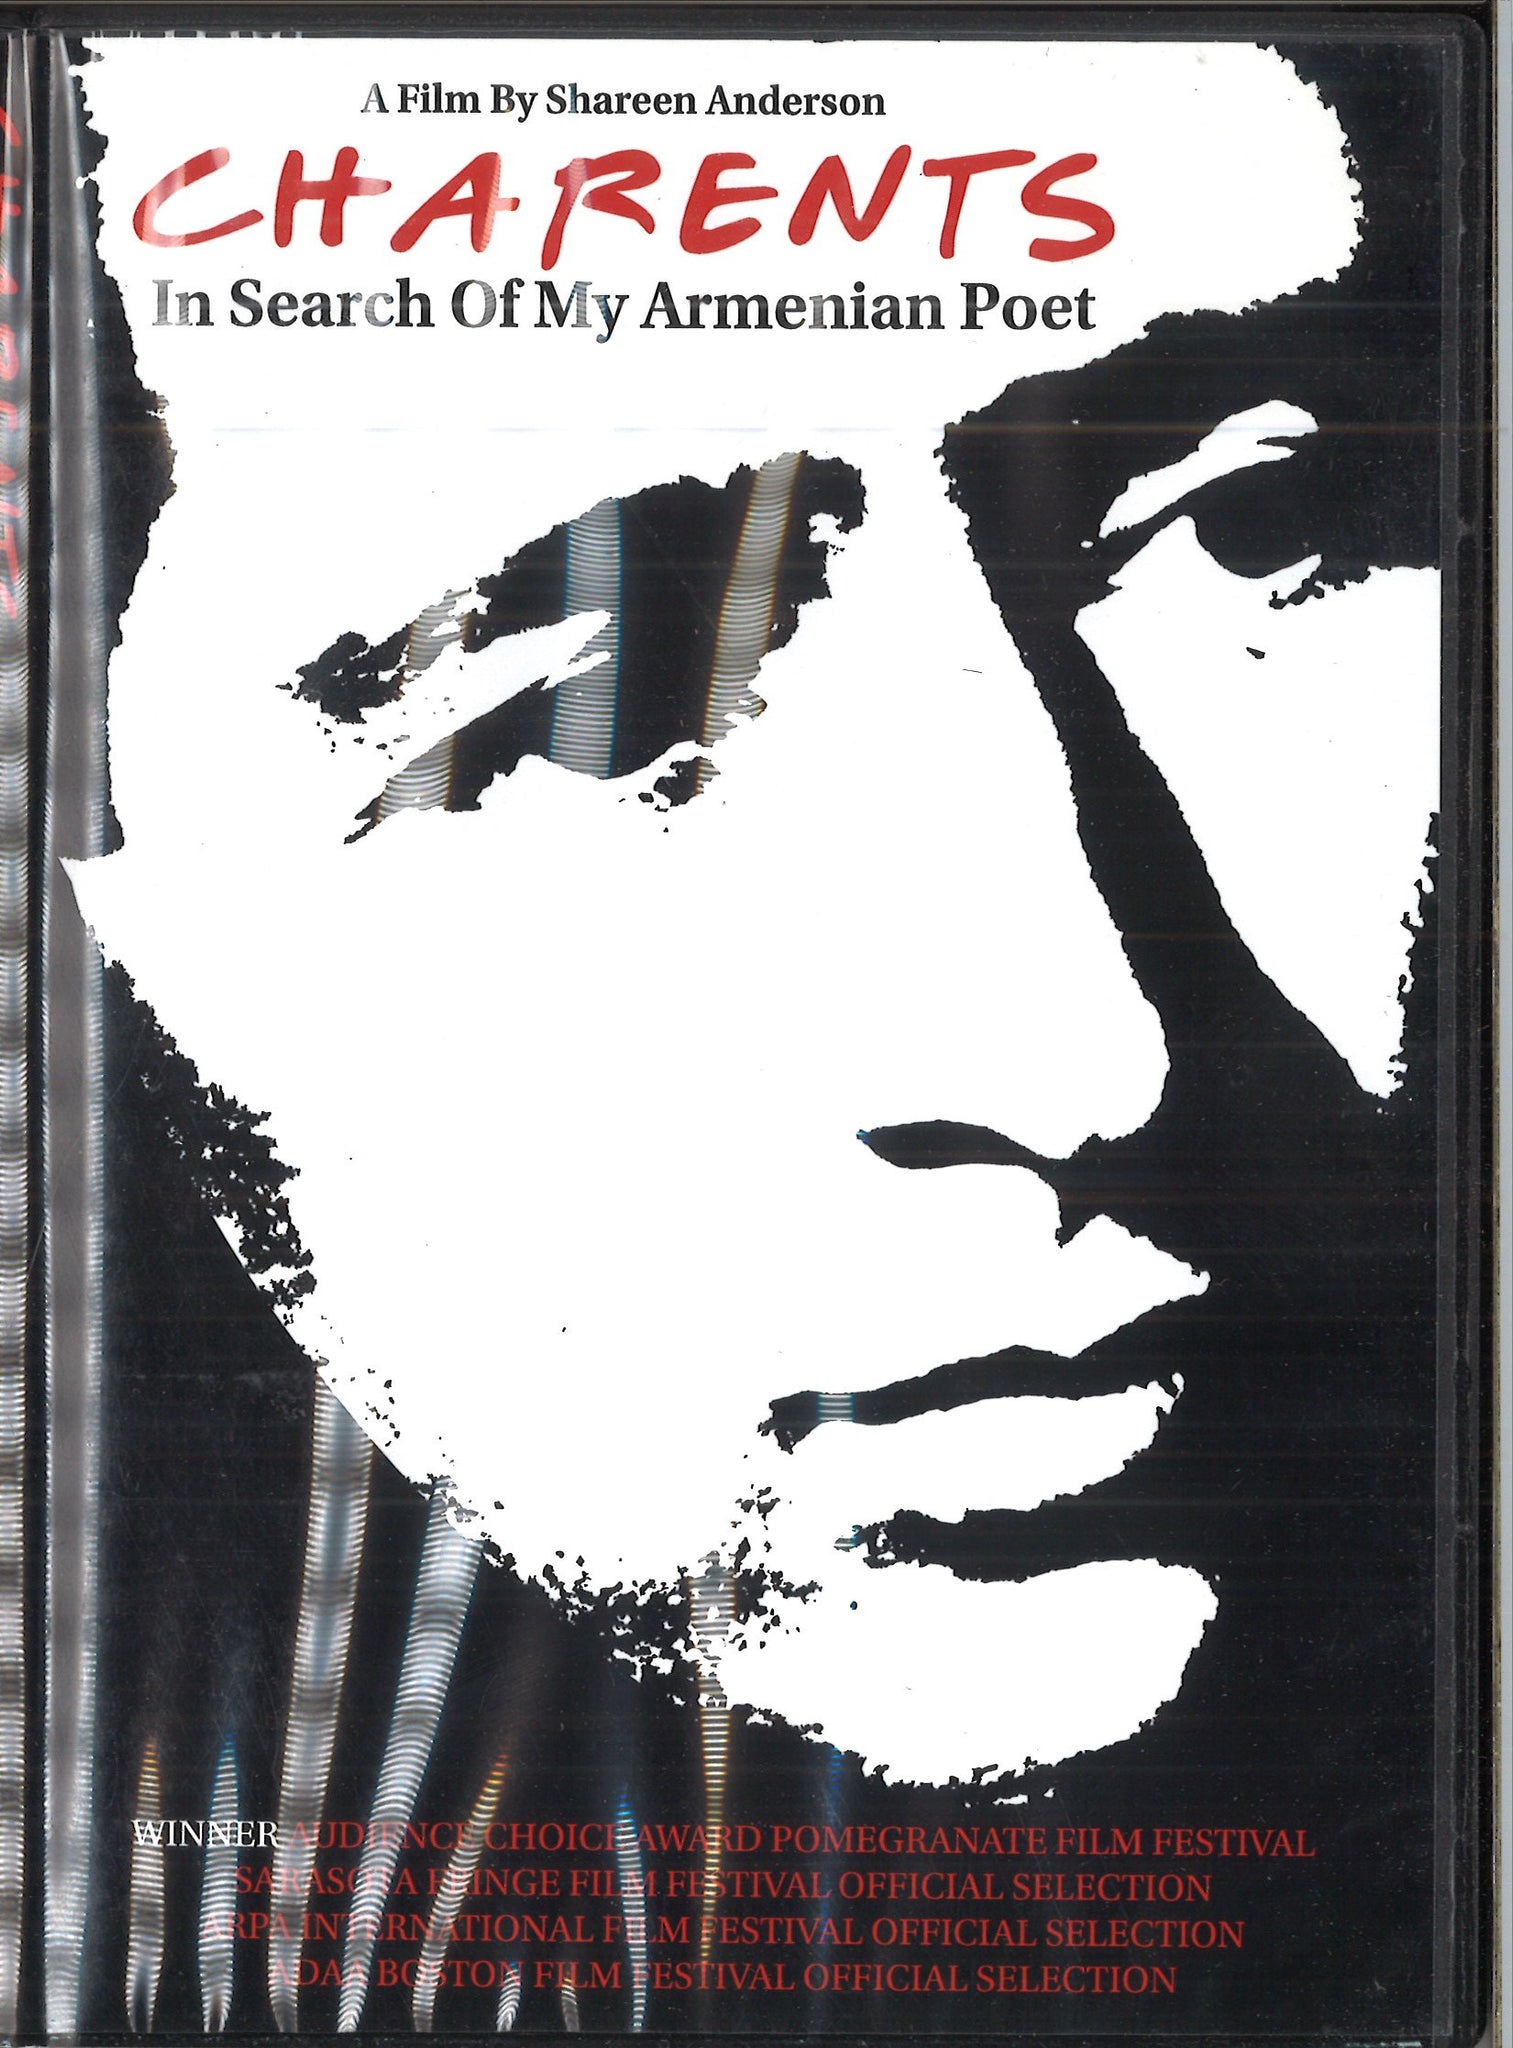 CHARENTS: In Search of my Armenian Poet